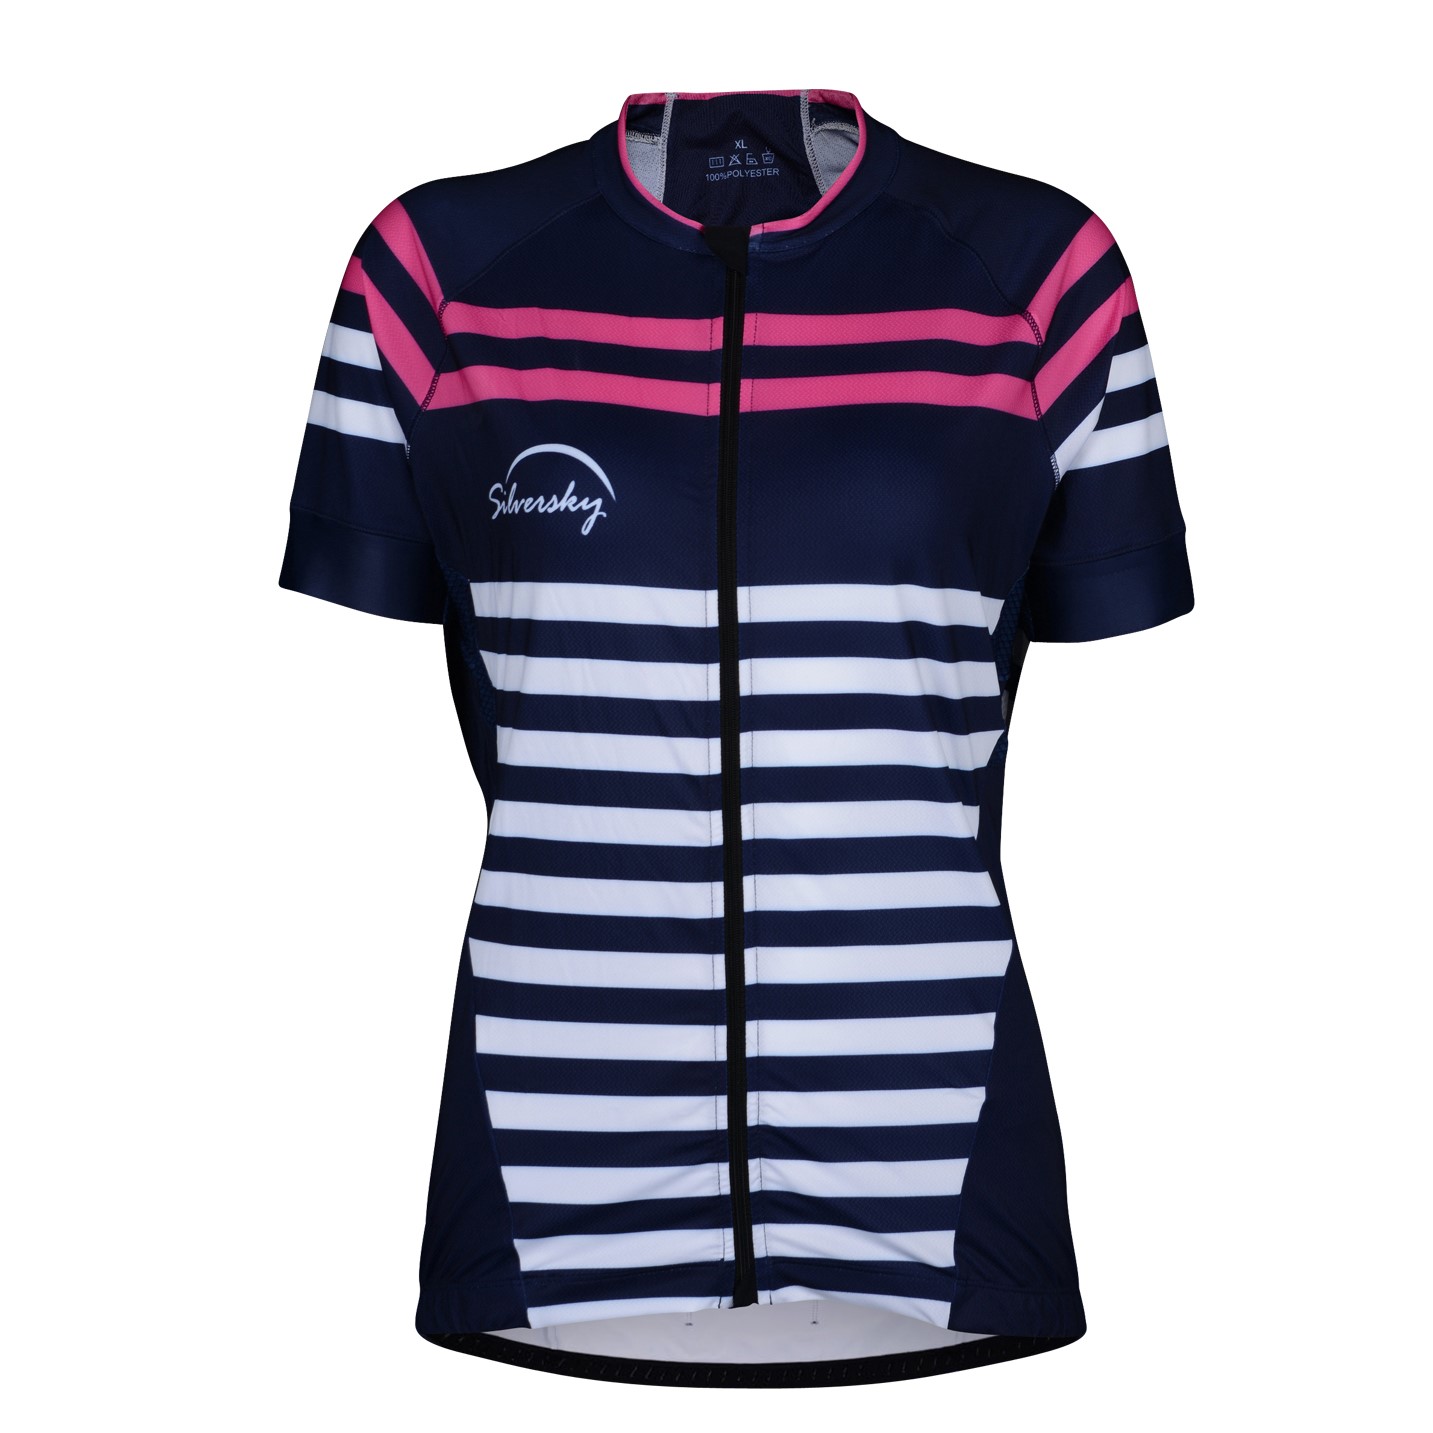 Sailor- Girls Short Sleeved Cycle Jersey